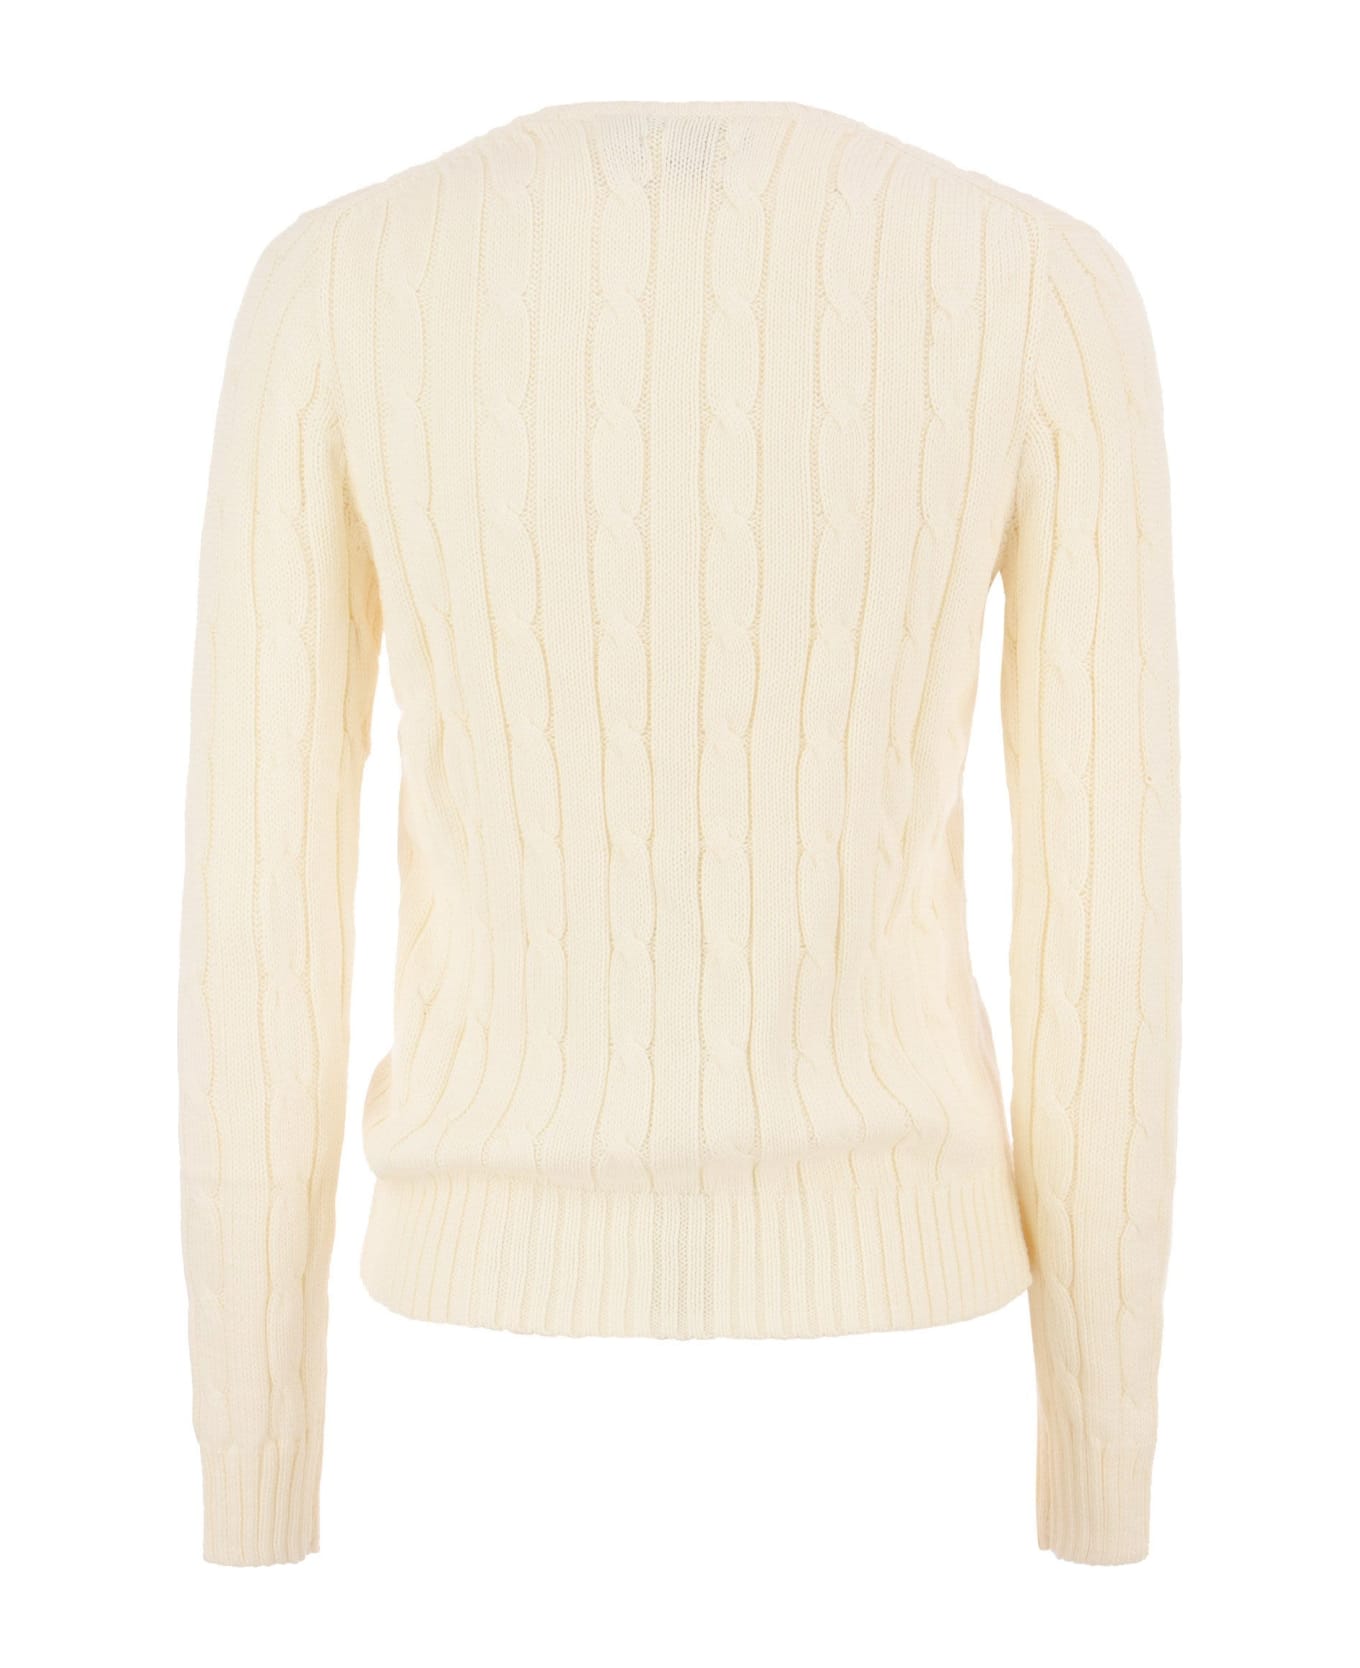 Polo Ralph Lauren Cable Knit Sweater - White